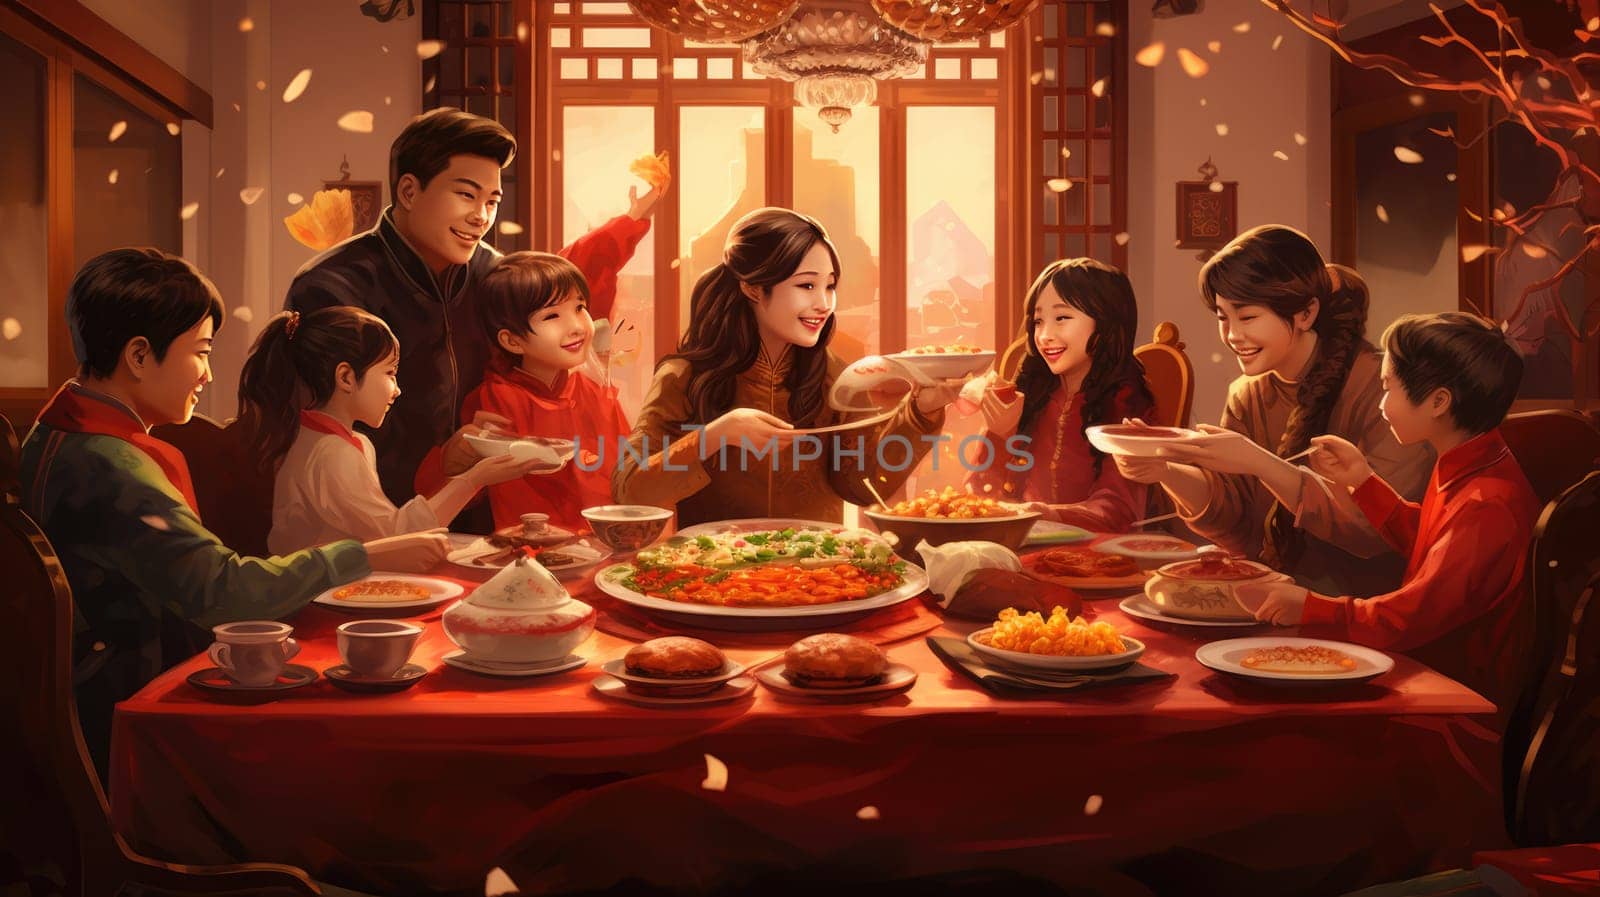 On the Chinese New Year reunion Night, the Spring Festival Dinner, the family to be warm and reunited together.